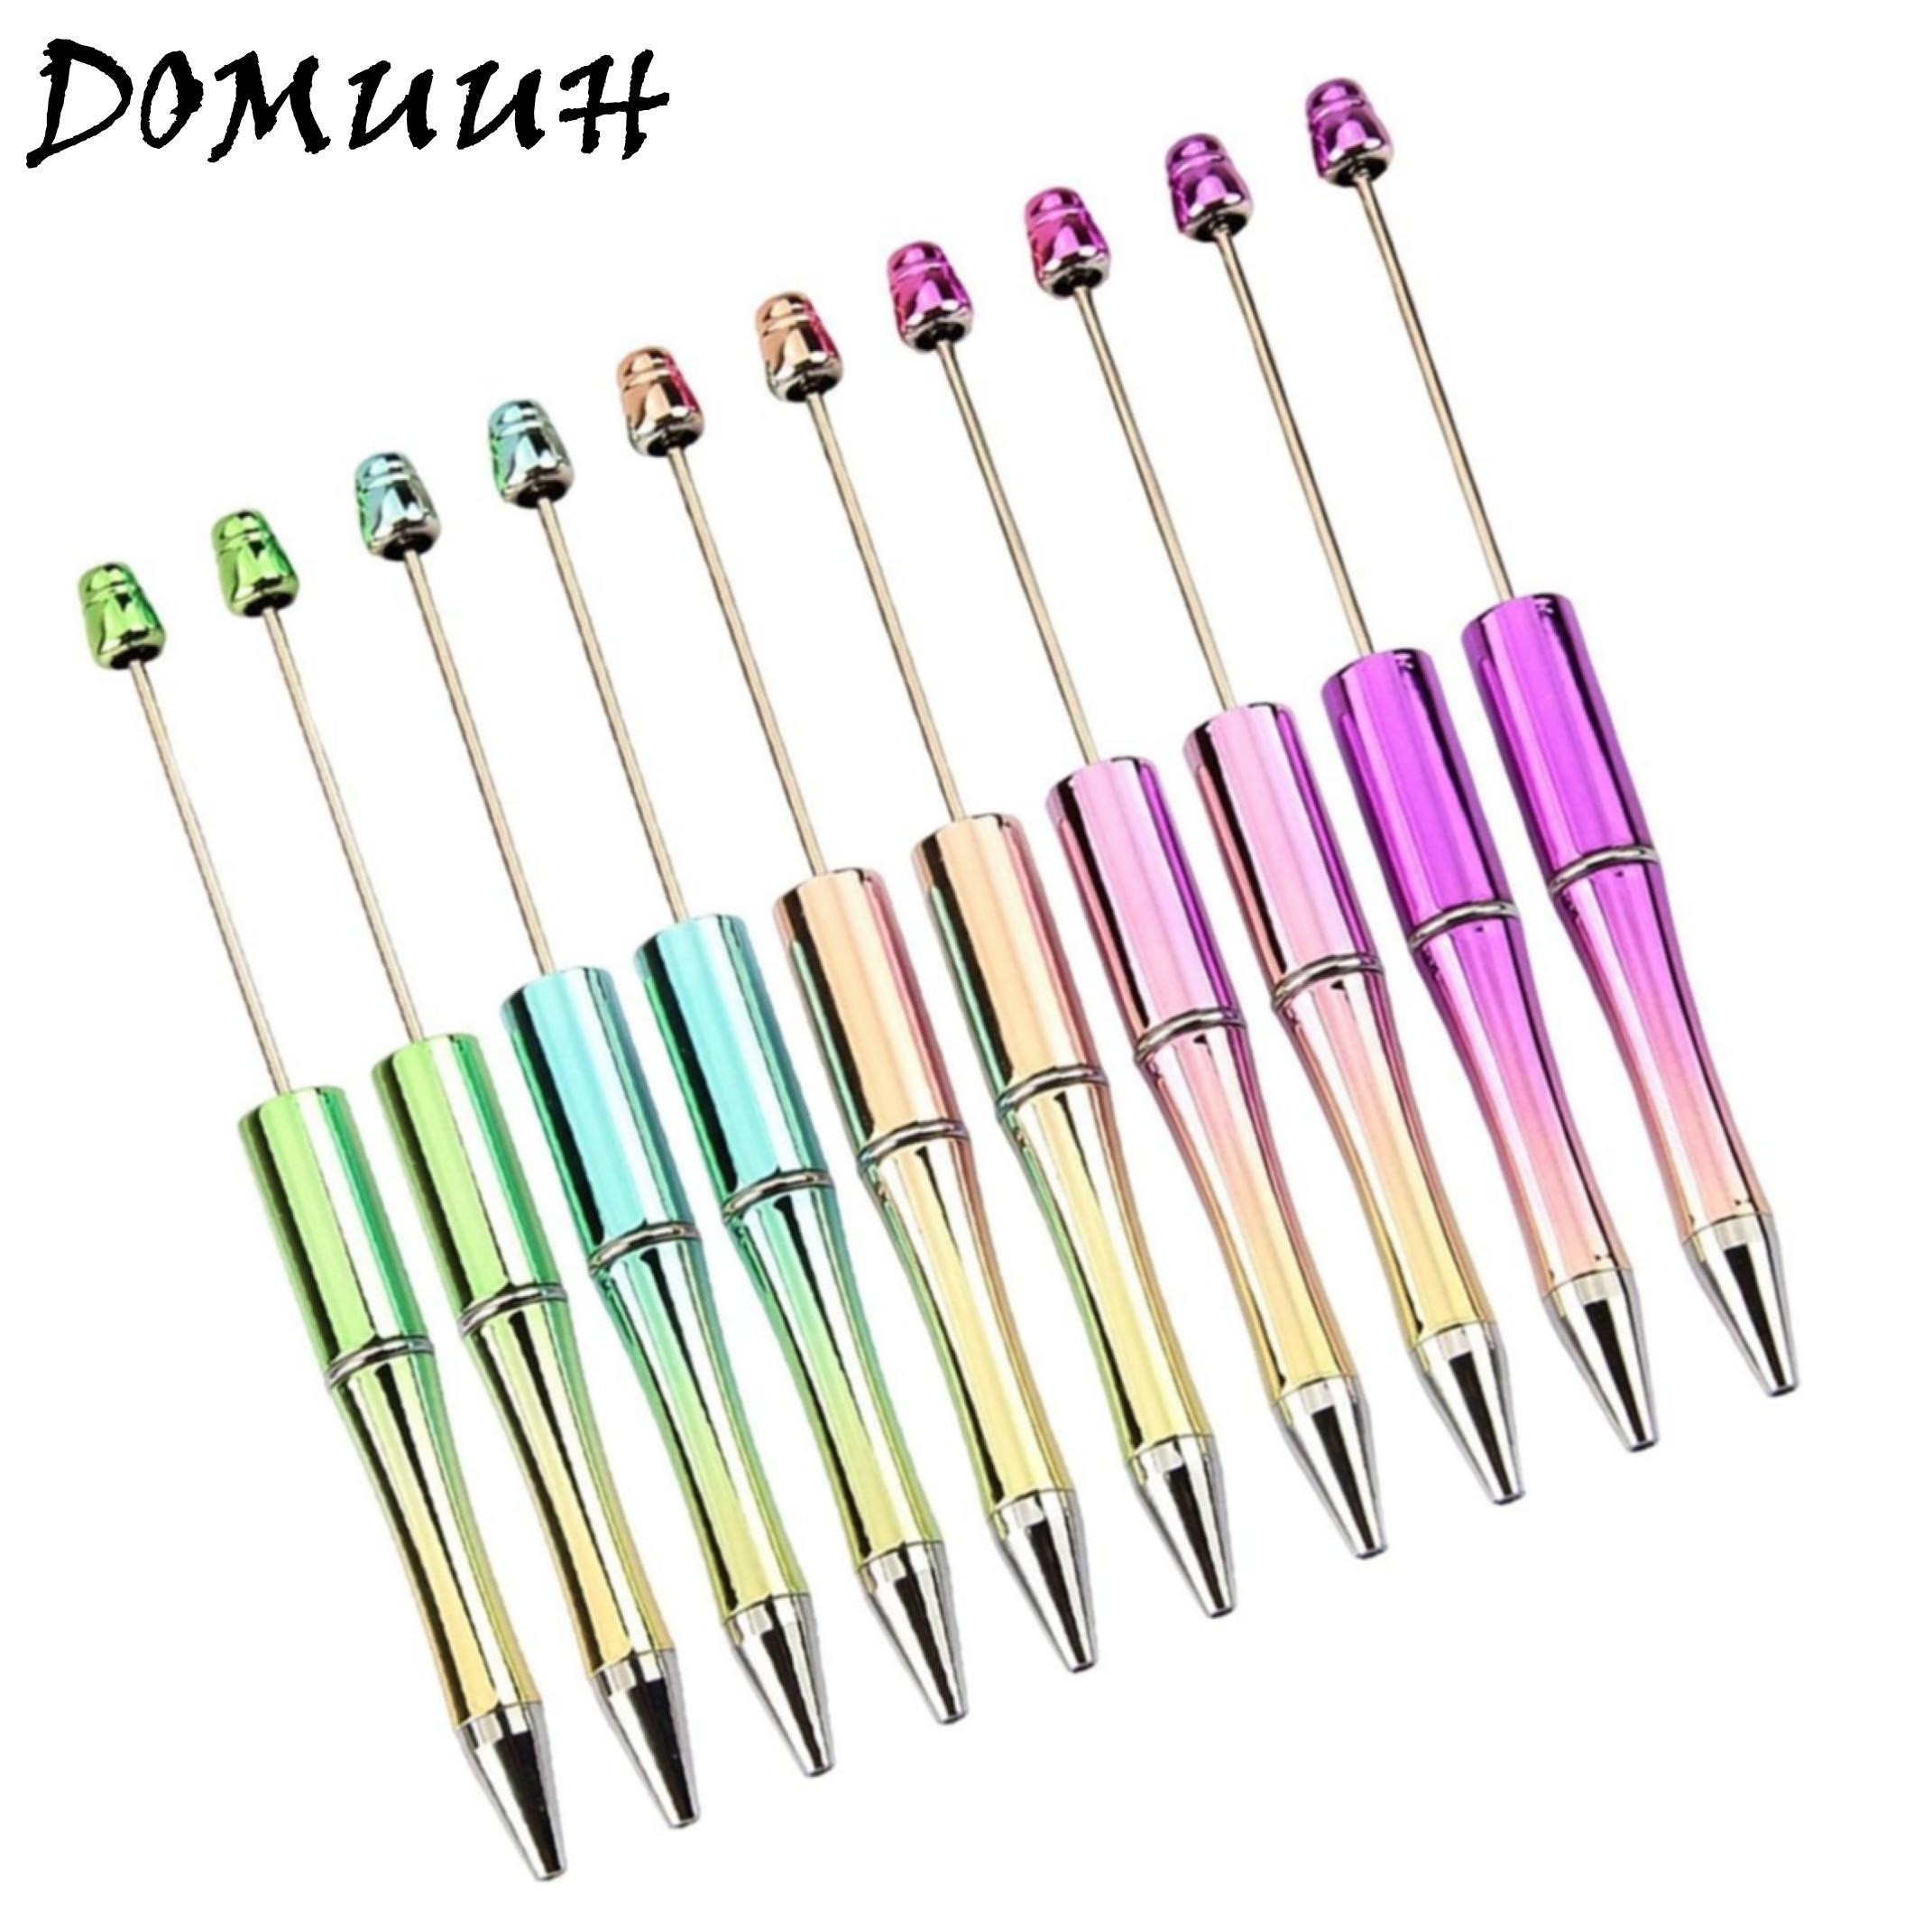 

10pcs Electroplated Bead Pen Plastic Ballpoint Pen Bead Ballpoint Pen Assorted Bead Pen Shaft Black Ink Rollerball Pen For Office School Supplies